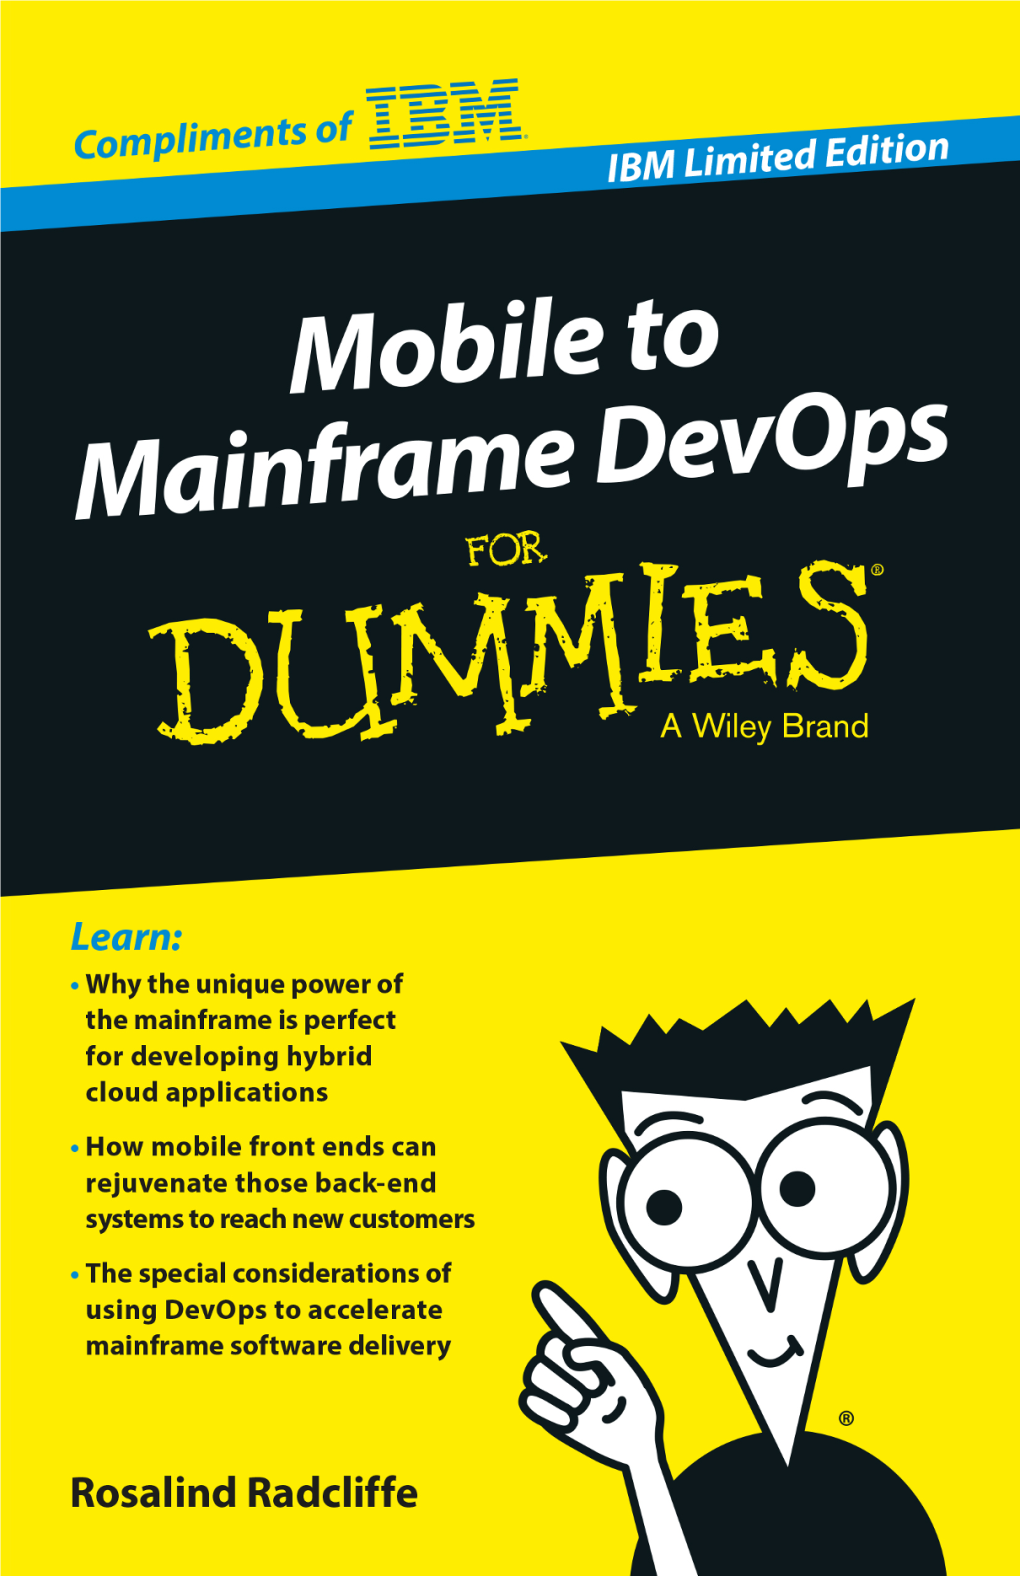 Mobile to Mainframe Devops for Dummies®, IBM Limited Edition Published by John Wiley & Sons, Inc